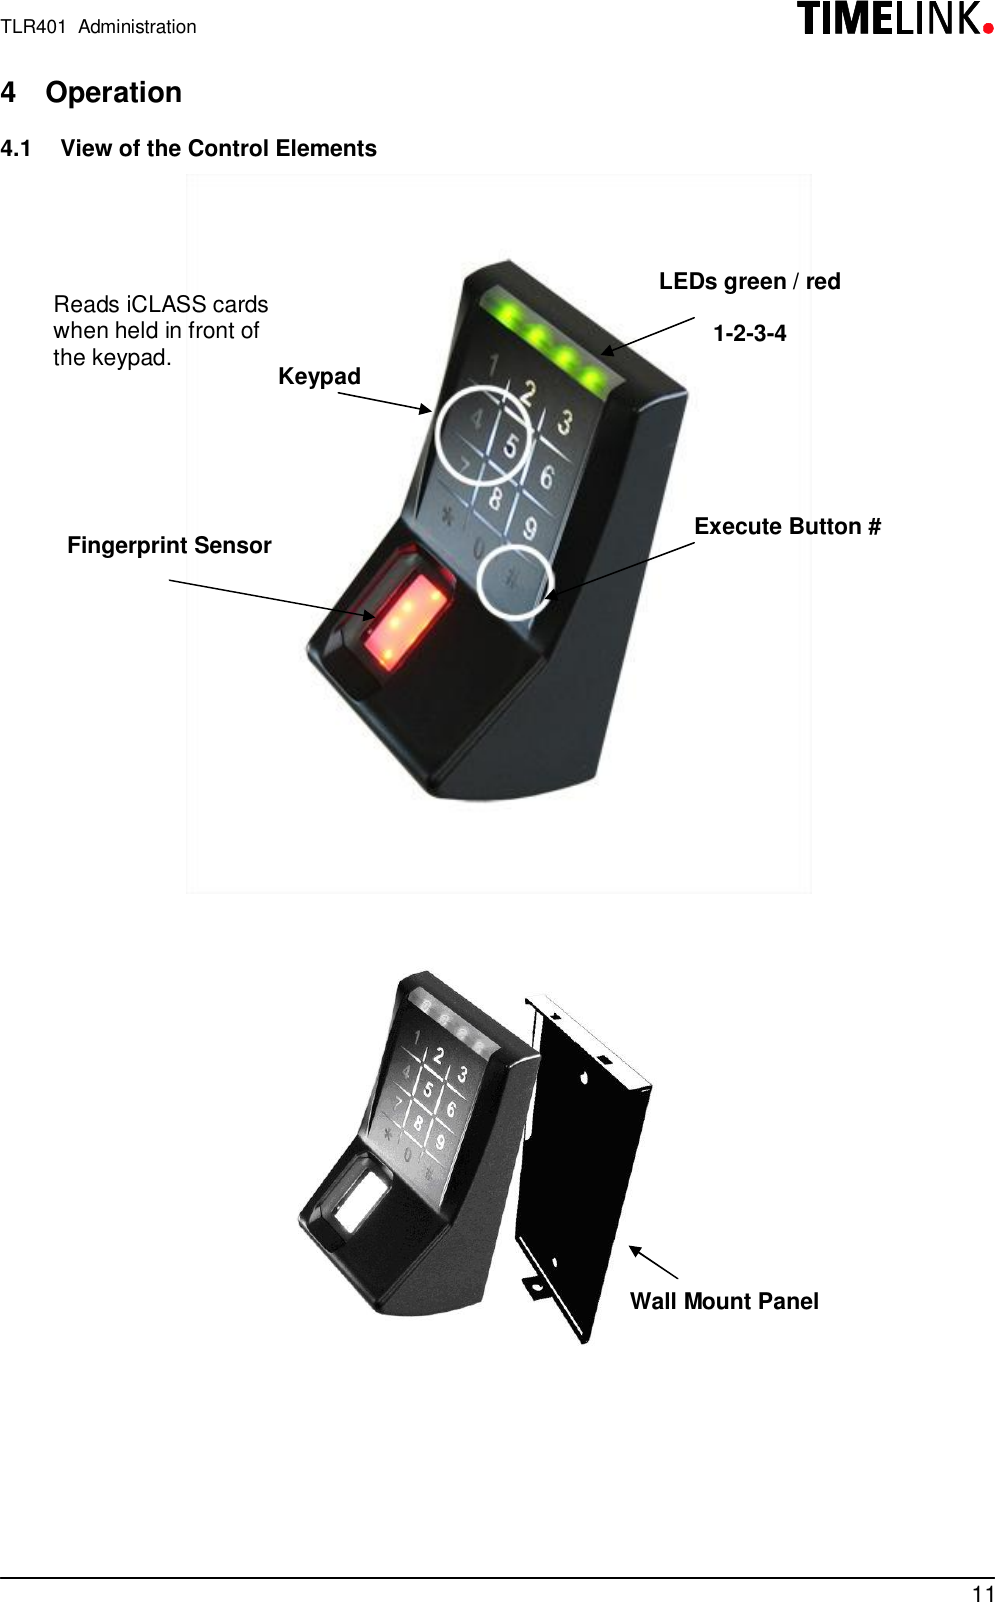 TLR401  Administration114 Operation4.1  View of the Control ElementsLEDs green /red1-2-3-4Execute Button #Fingerprint SensorKeypadWall Mount PanelReads iCLASS cardswhen held in front ofthe keypad.